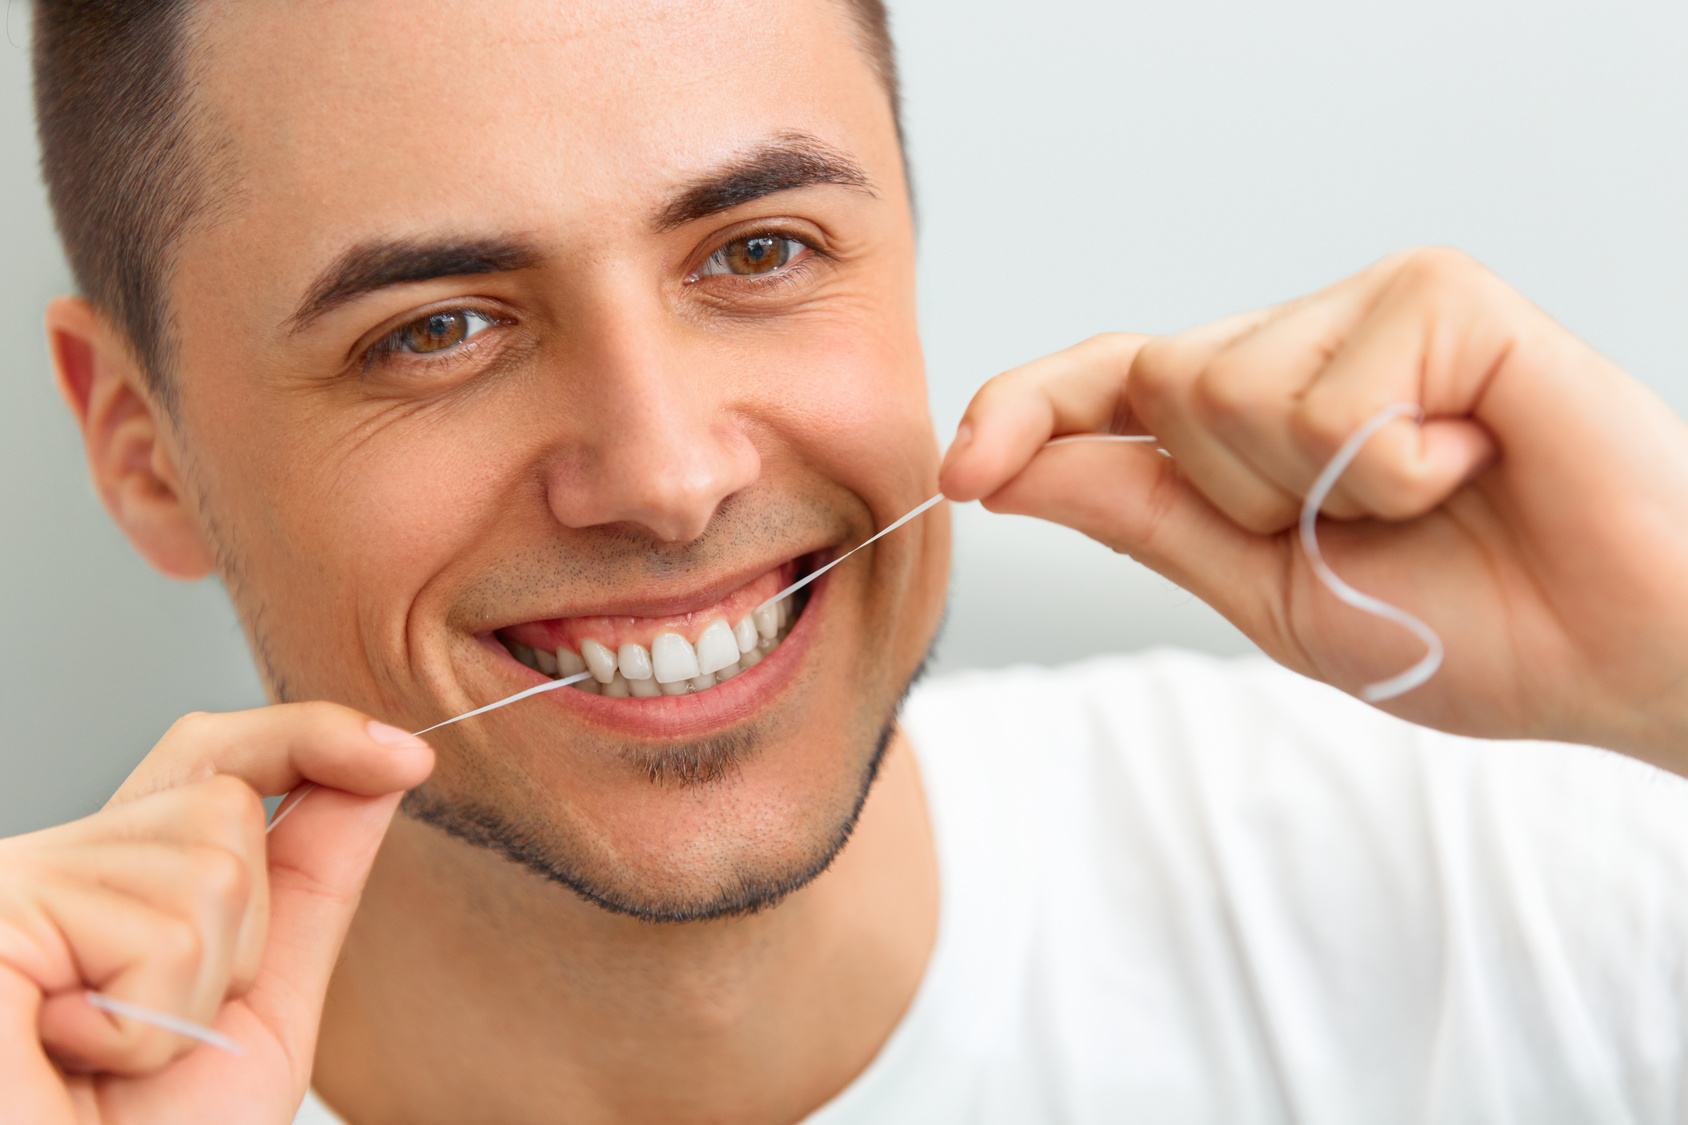 Easy Solutions for Common Aesthetic Dental Issues